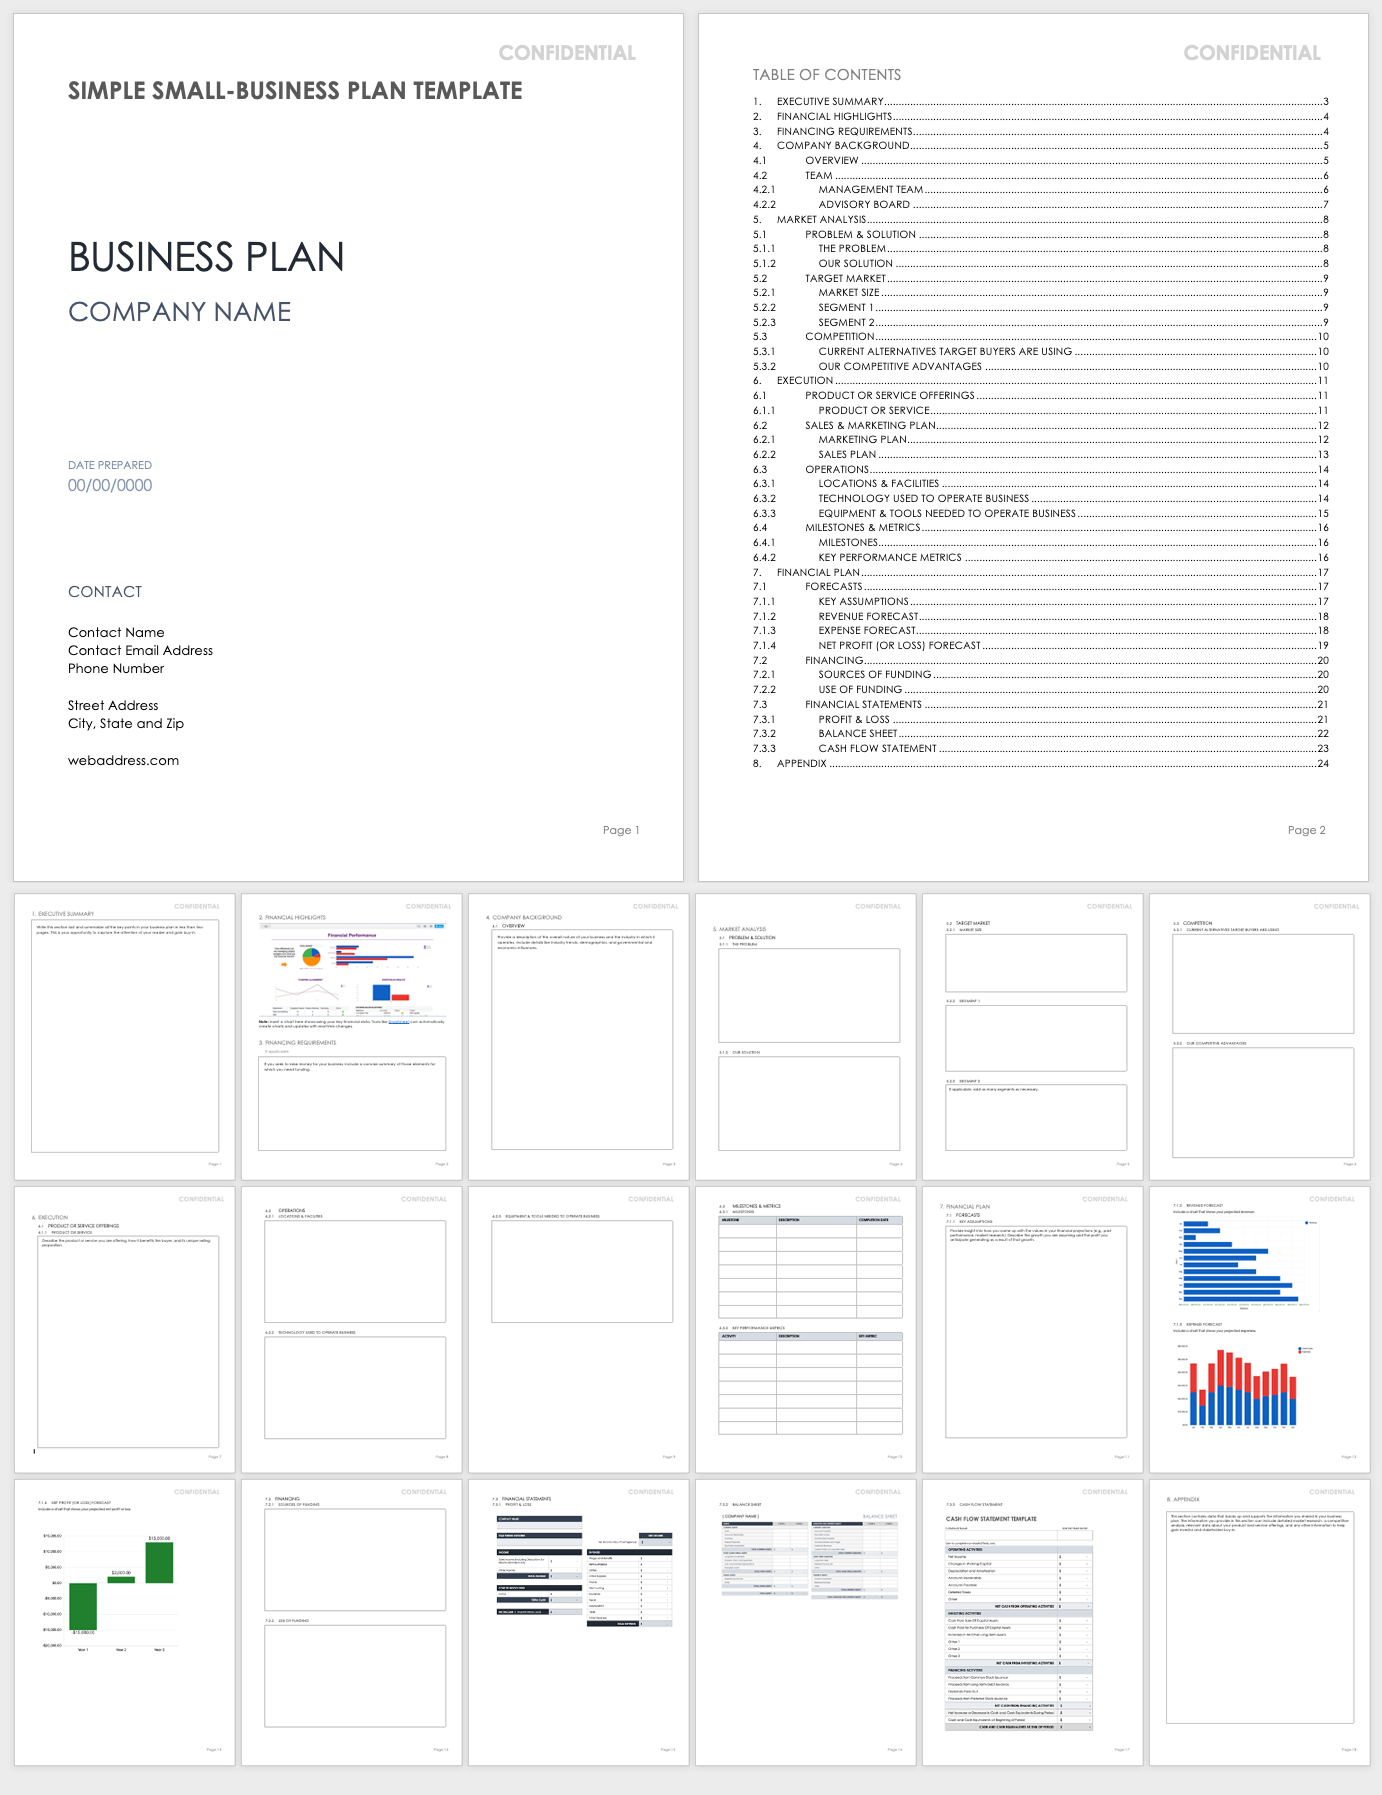 business plan for a small business template